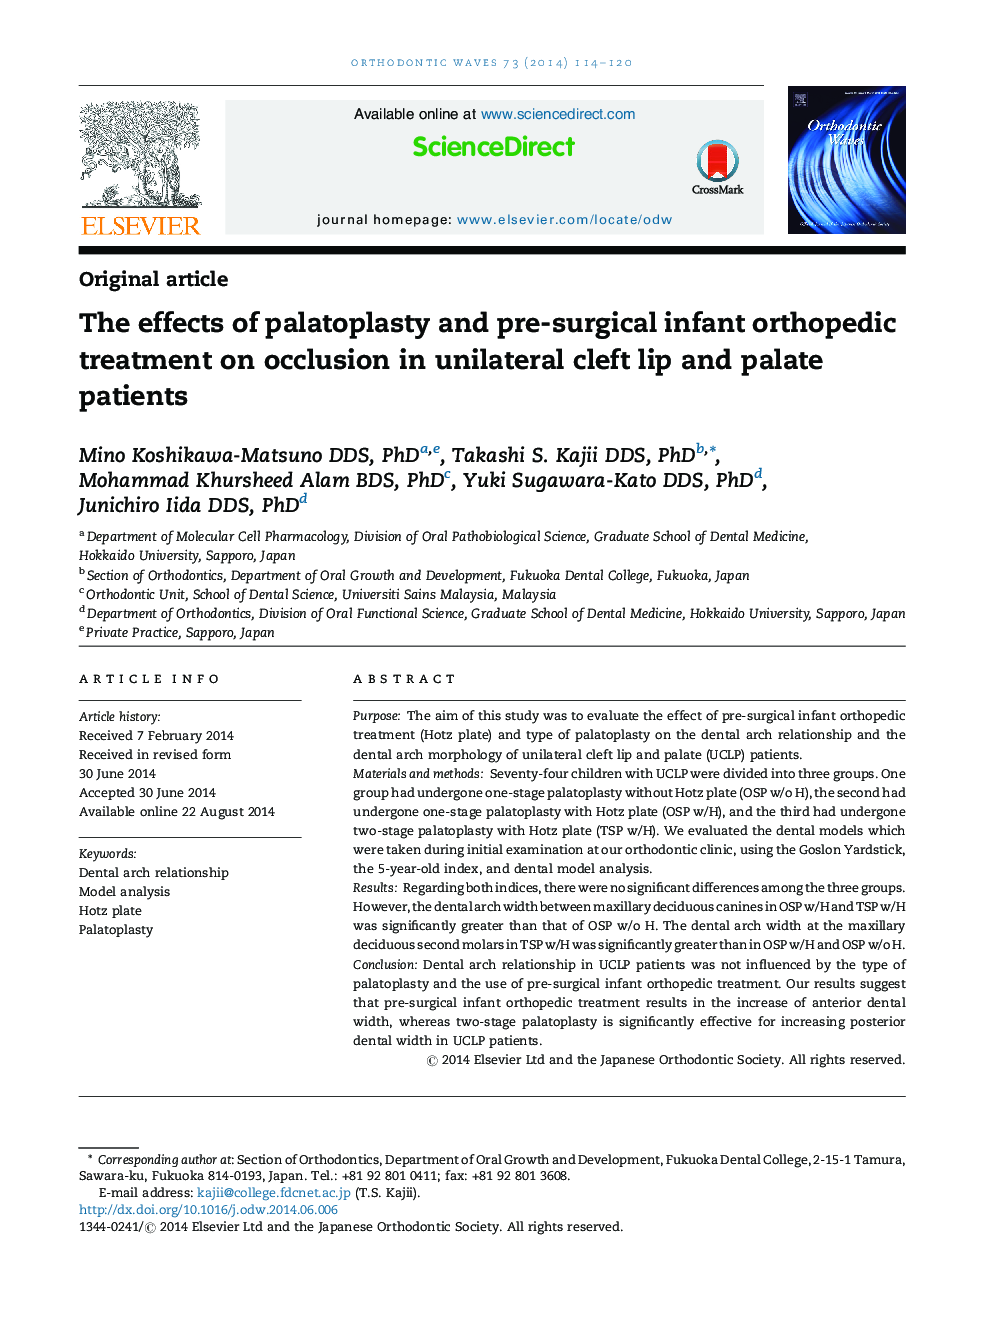 The effects of palatoplasty and pre-surgical infant orthopedic treatment on occlusion in unilateral cleft lip and palate patients